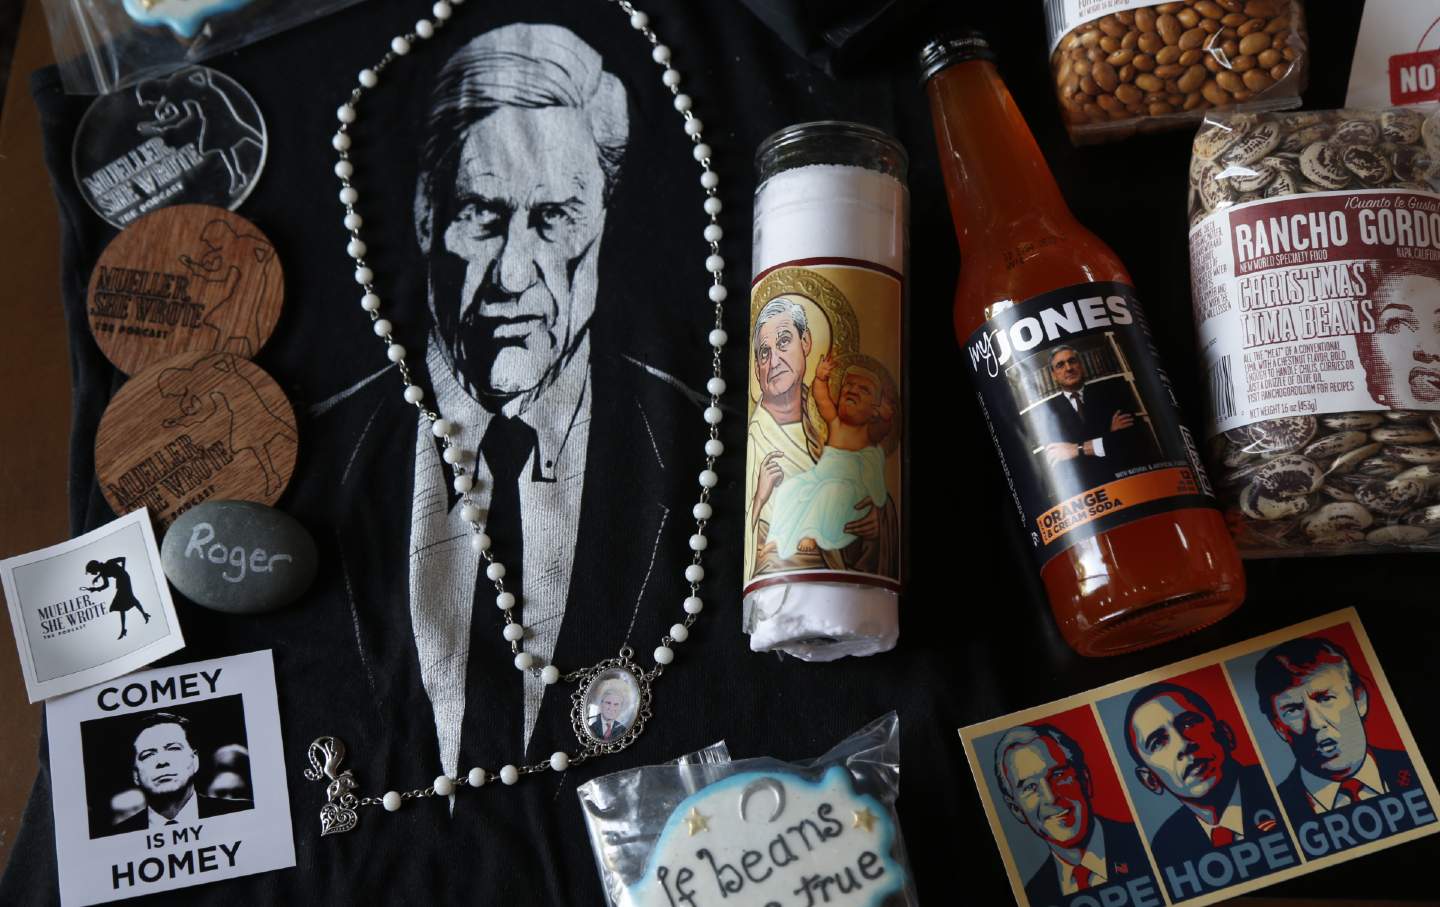 A collection of gift items with Robert Mueller's face on them, including a necklace, a candle, and a poster.